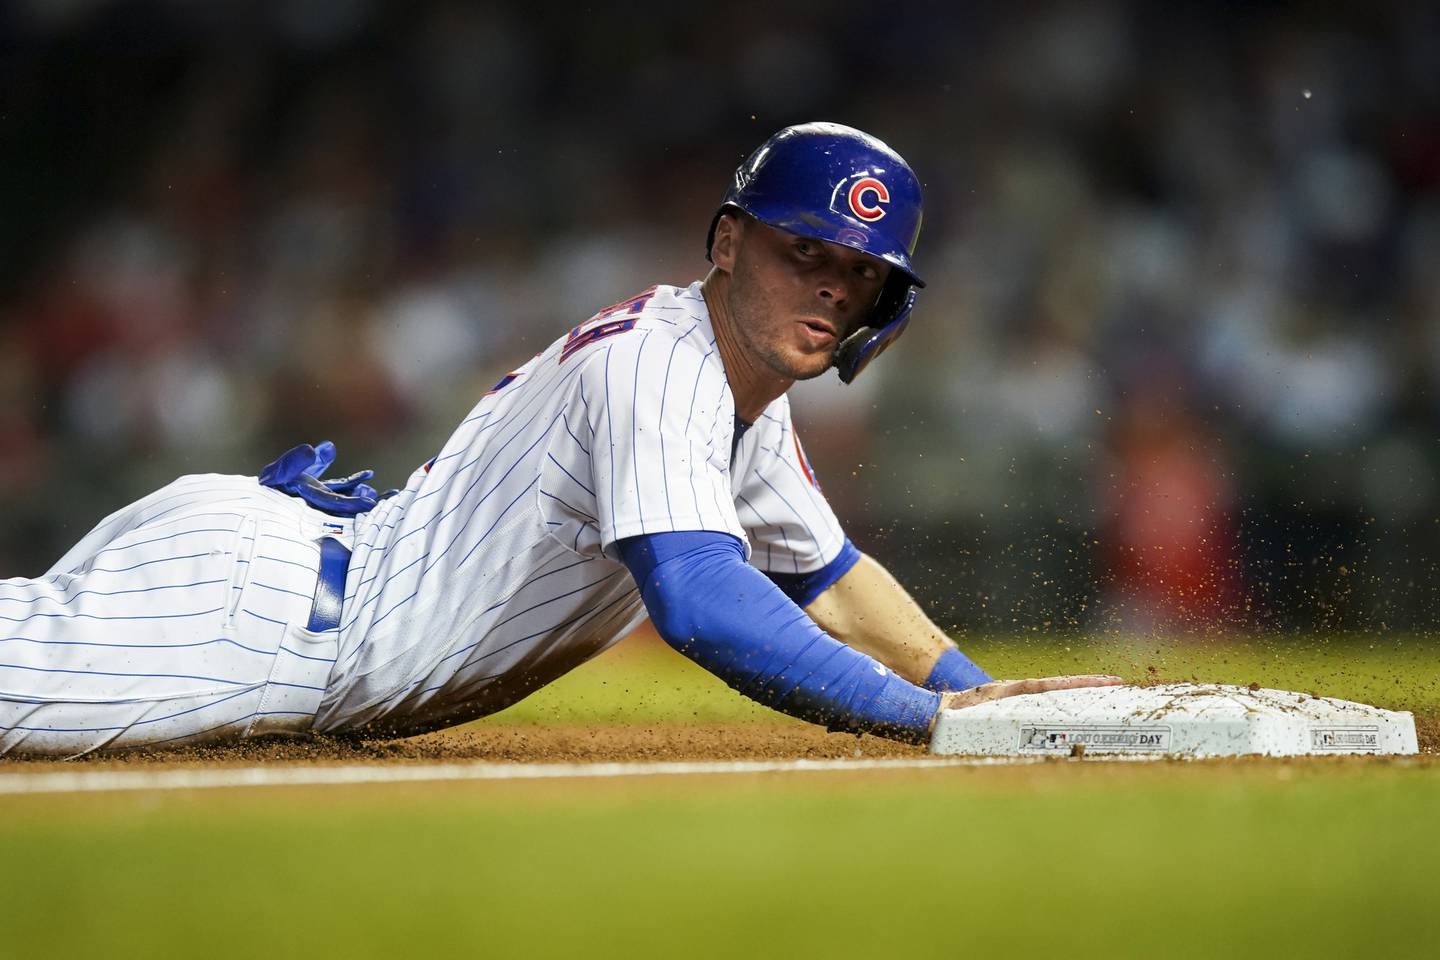 Cubs shortstop Nico Hoerner slides safely into third base during a game against the Cardinals on June 2 at Wrigley Field. 